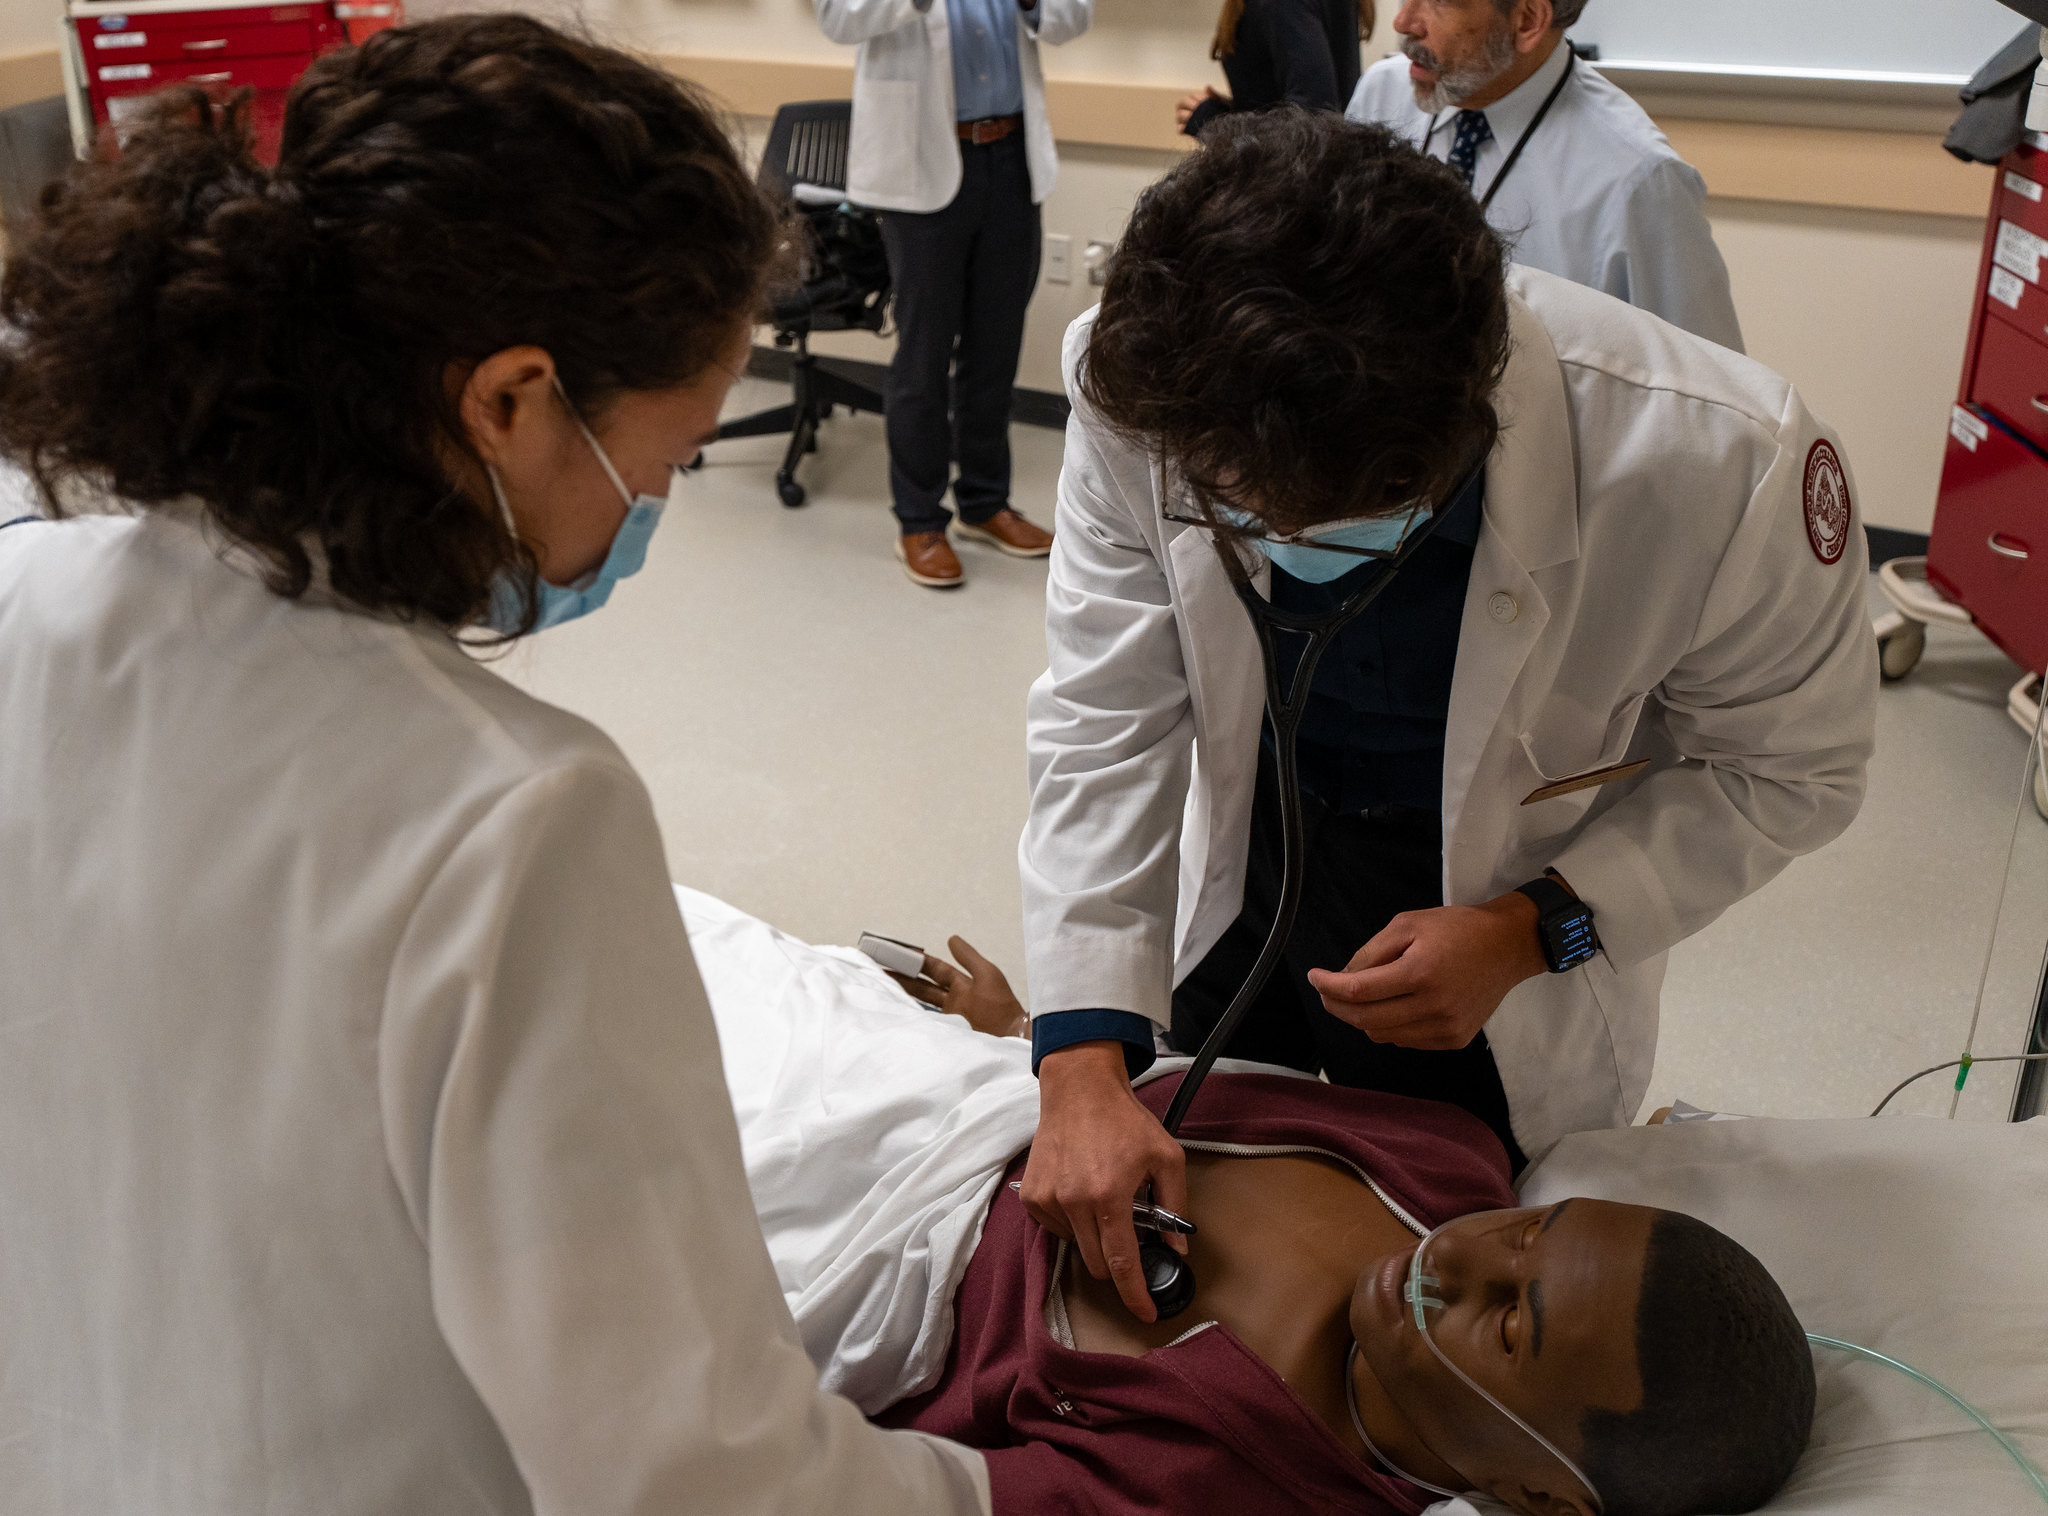 Two medical students wearing white lab coats practicing on a dark skin manikin with a stethoscope.